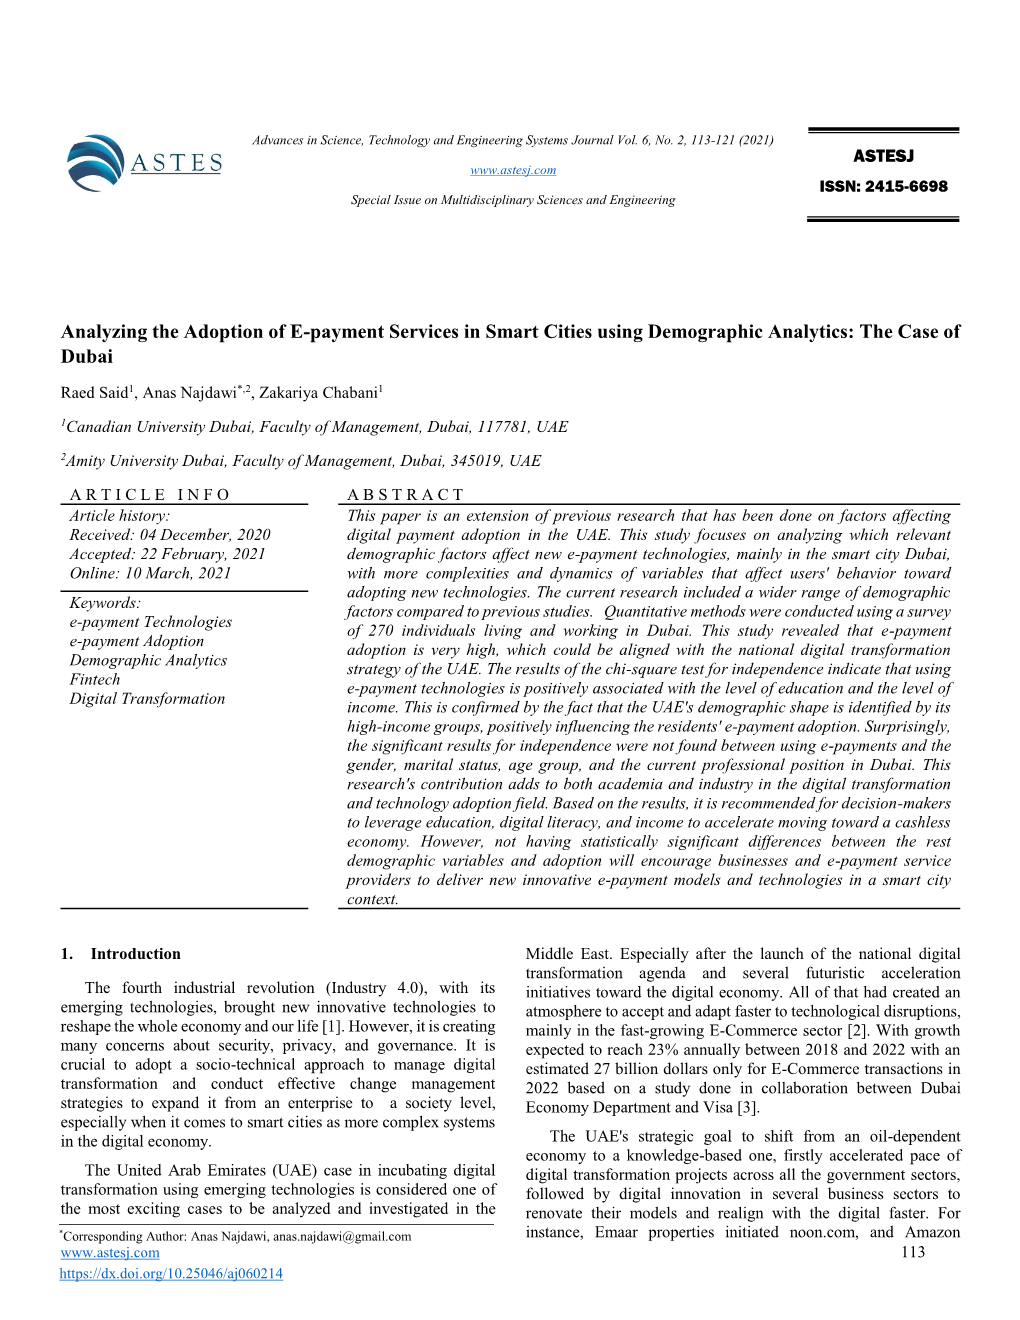 Analyzing the Adoption of E-Payment Services in Smart Cities Using Demographic Analytics: the Case of Dubai